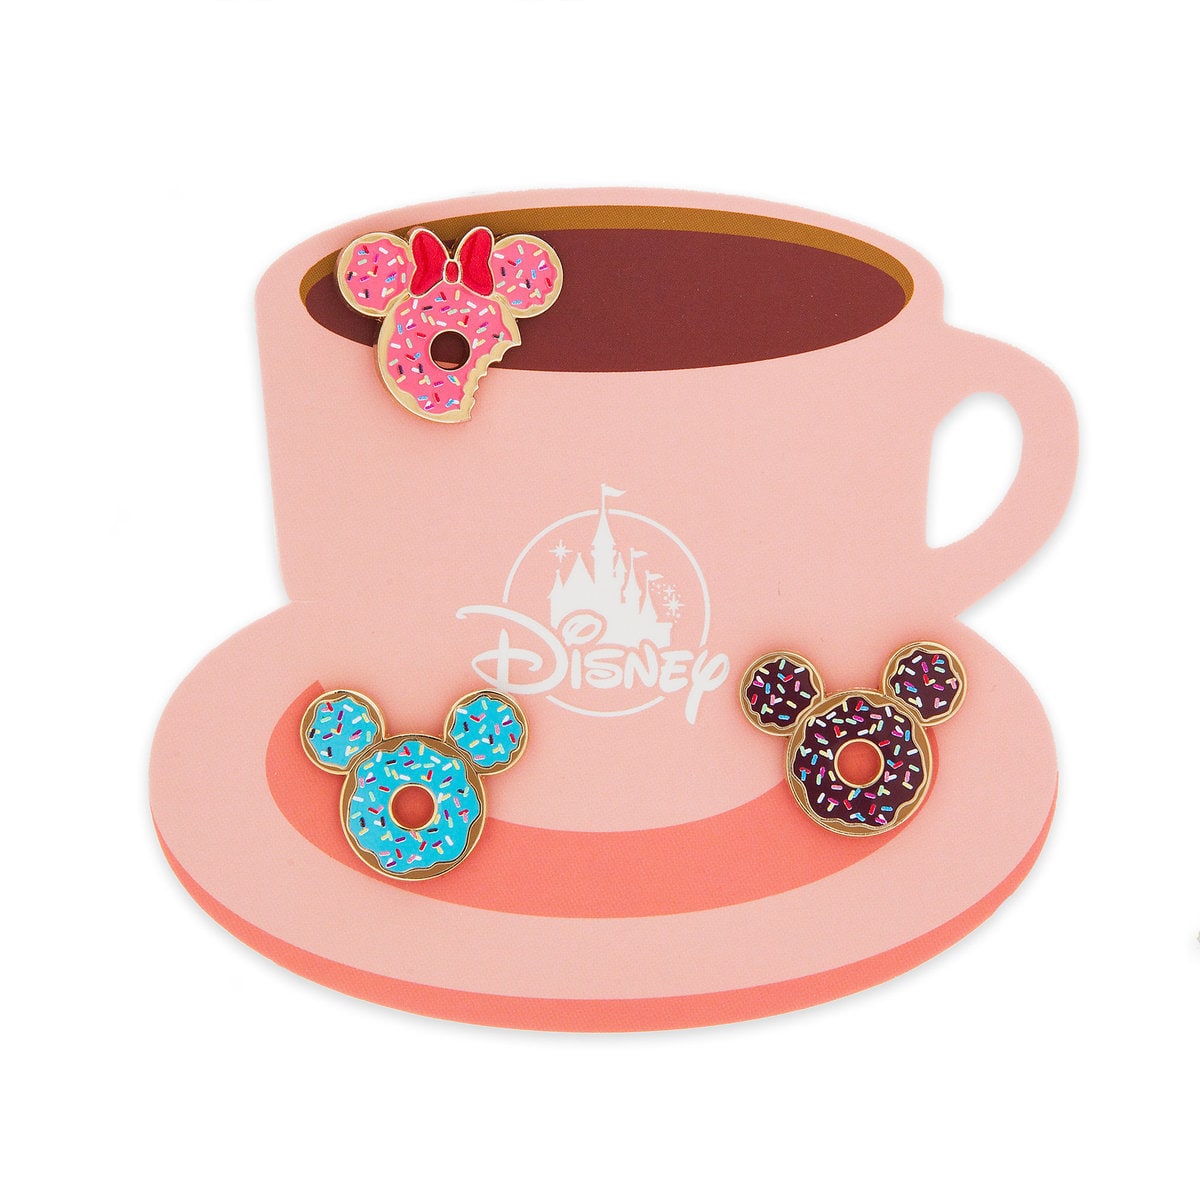 The Sweet Disney Obsessed Collection Is Now On shopDisney